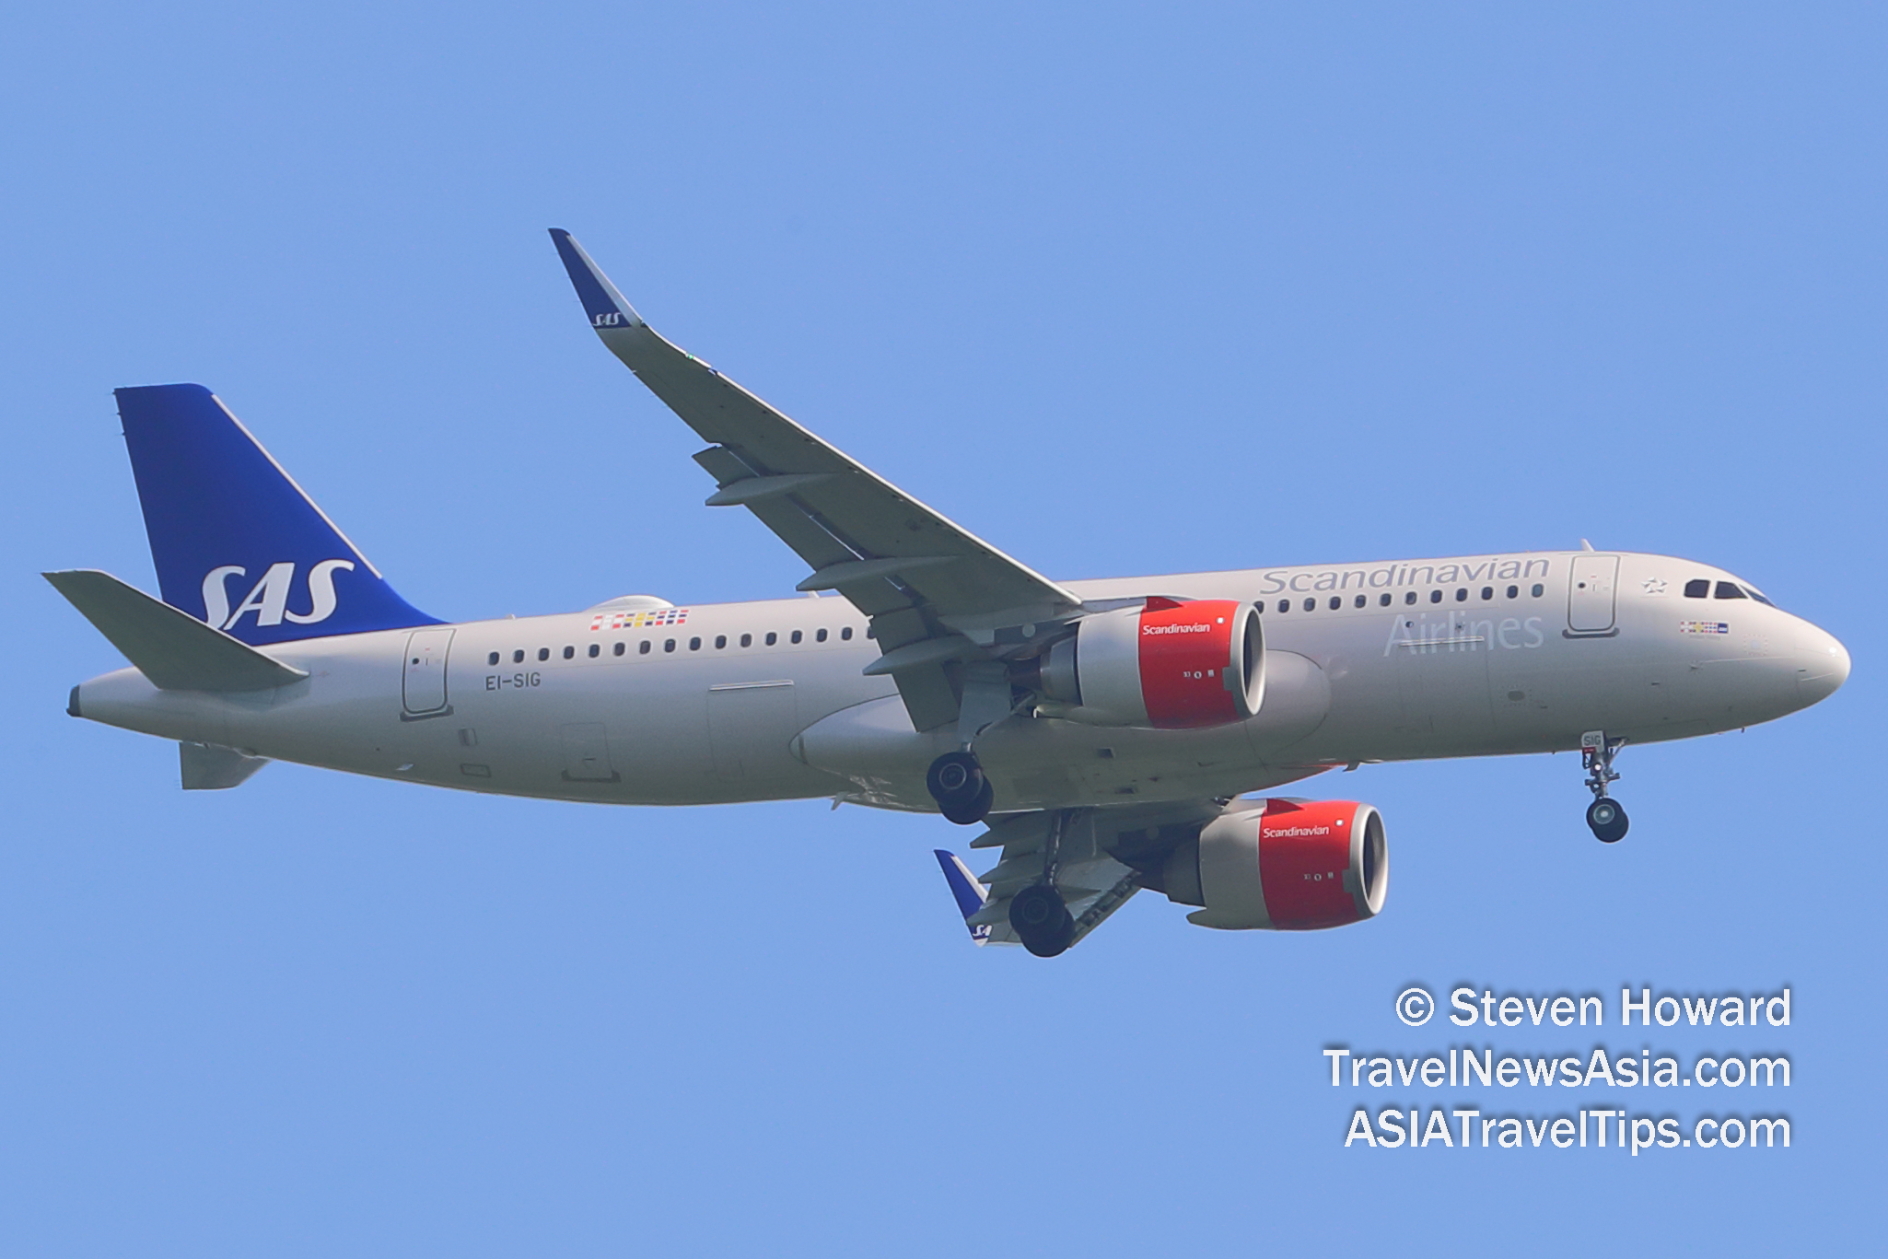 SAS A320 reg: EI-SIG. Picture by Steven Howard of TravelNewsAsia.com Click to enlarge.